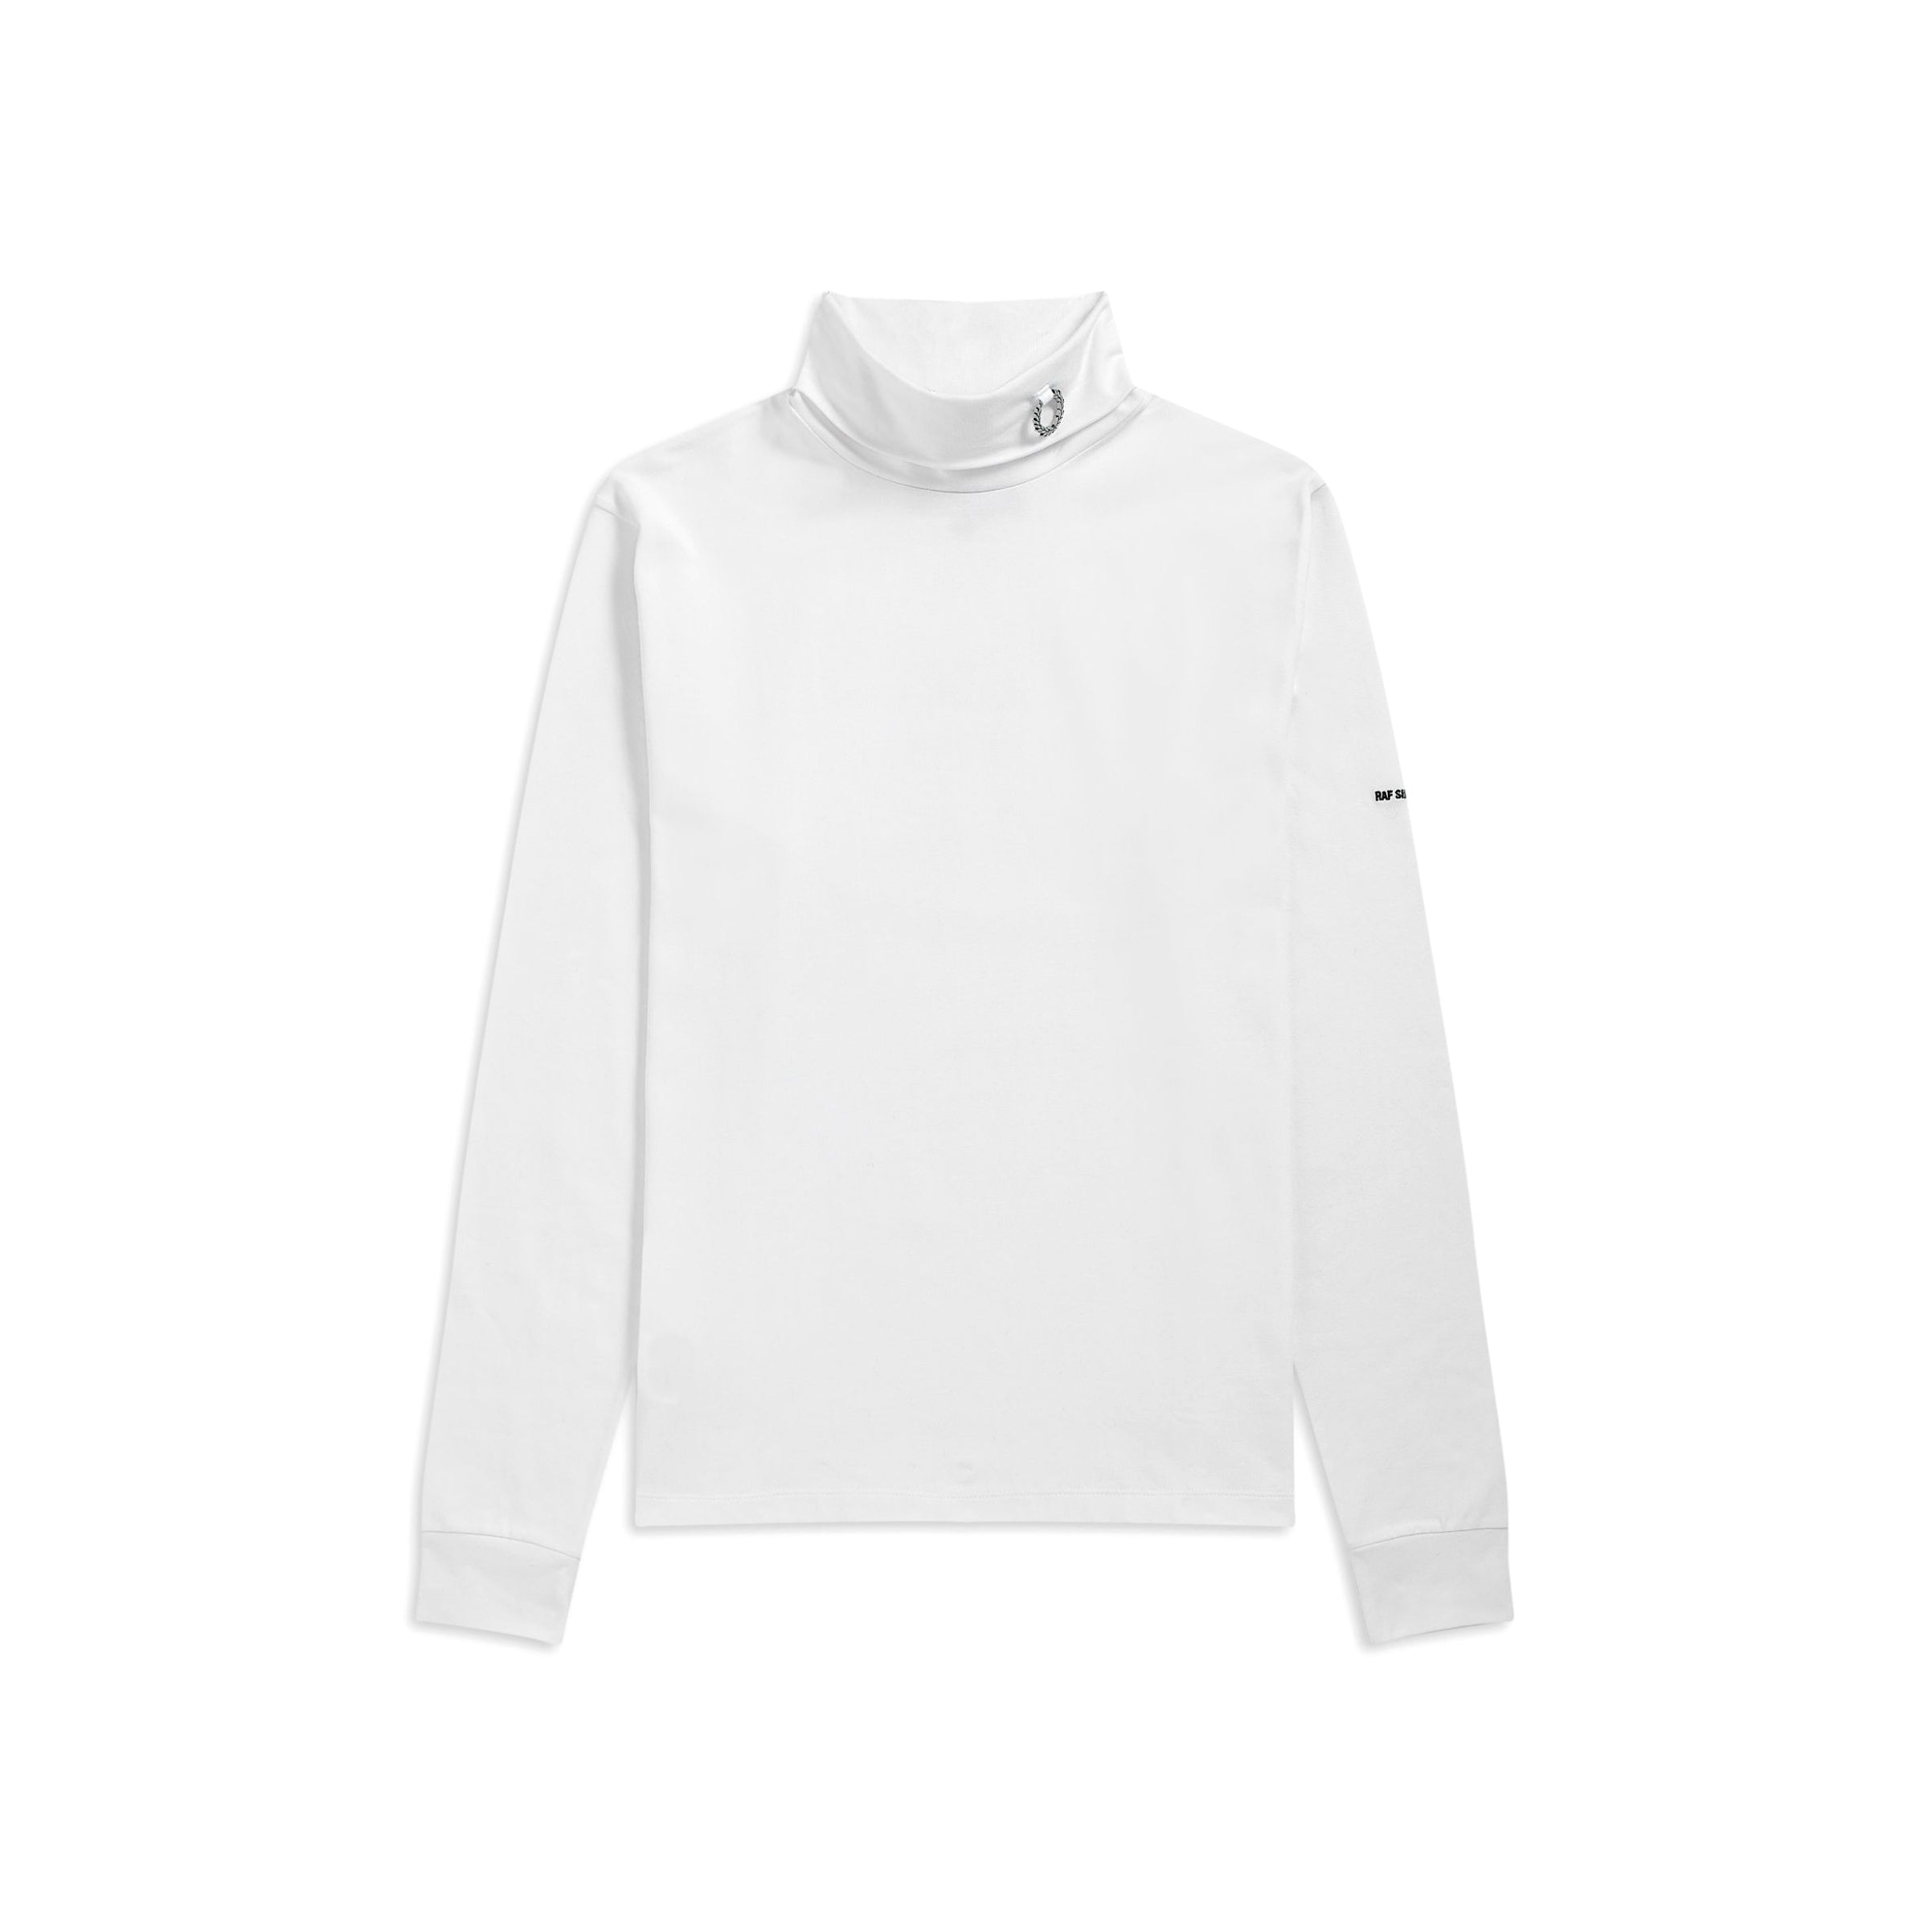 Fred Perry x Raf Simons Laurel Wreath Roll Neck White